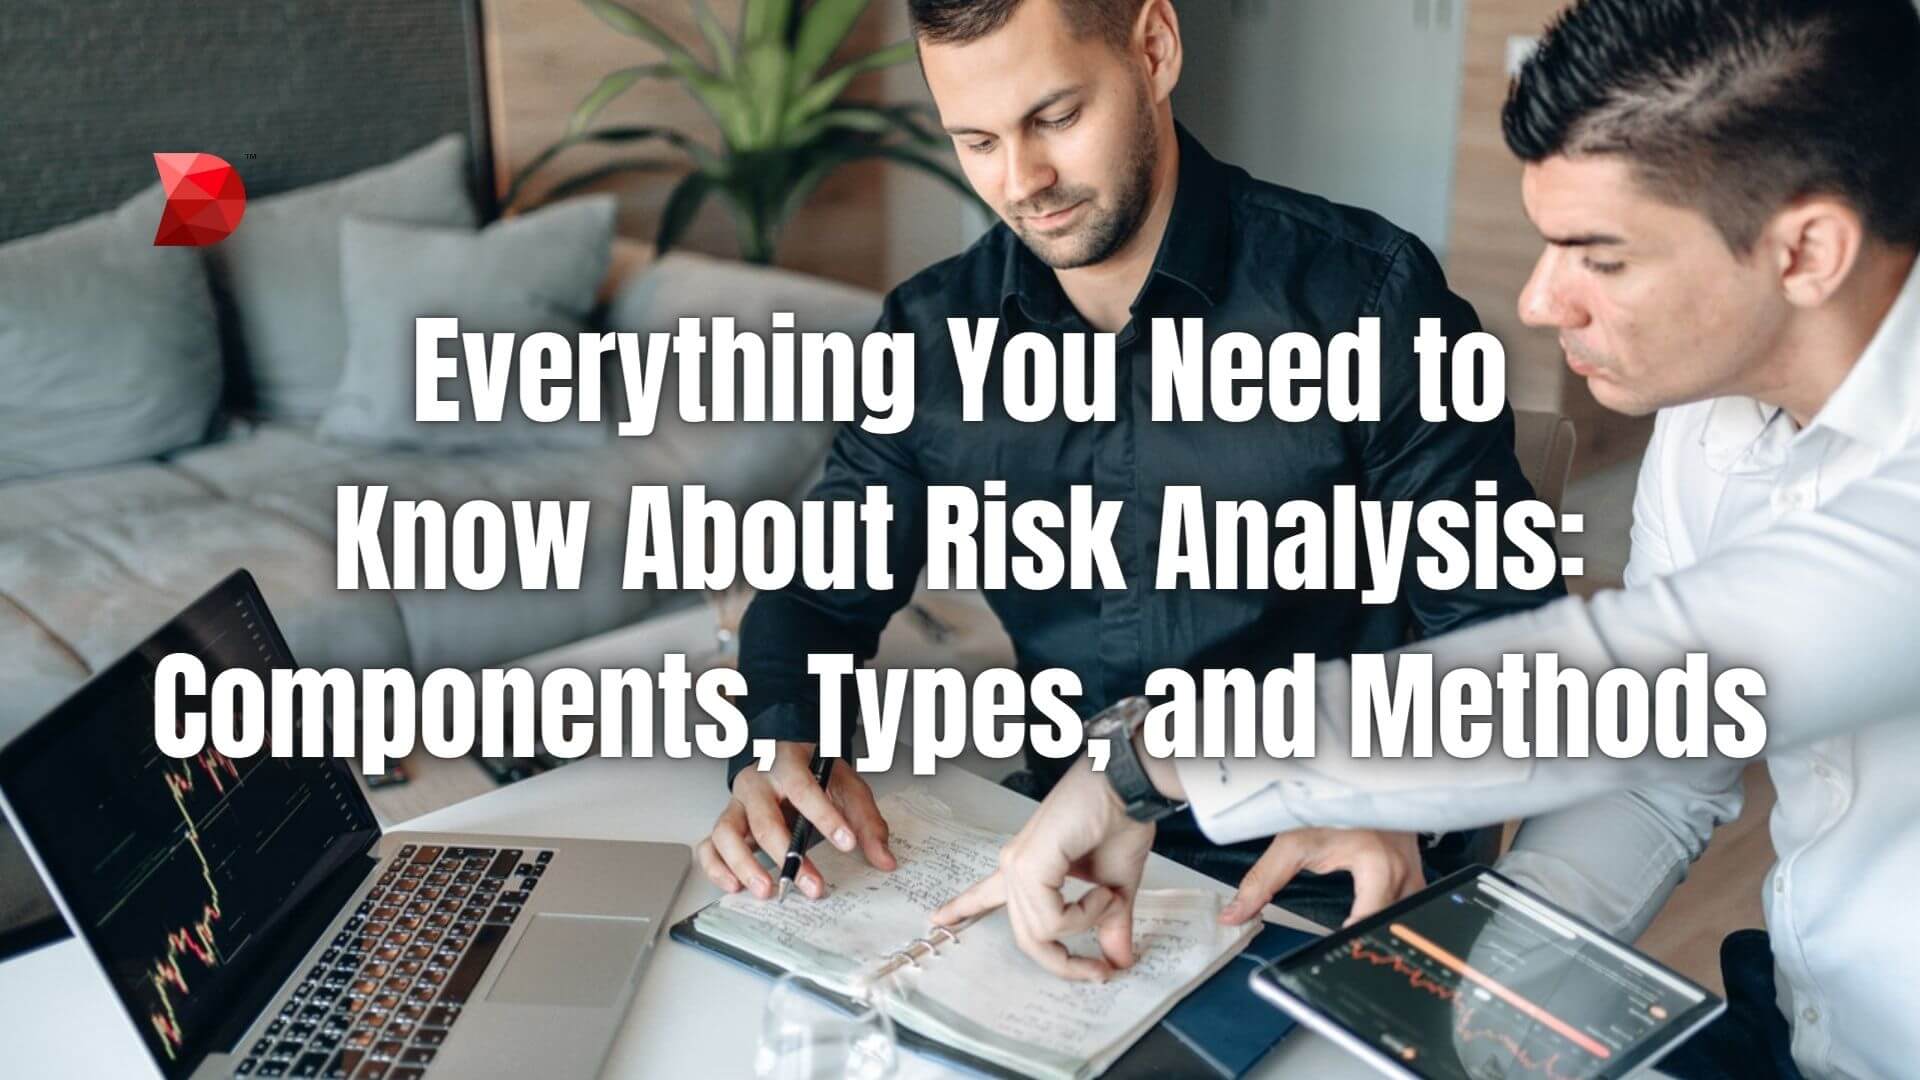 Gain insights to mitigate uncertainties effectively. Unlock the world of risk analysis with our guide featuring examples, types, and methods.